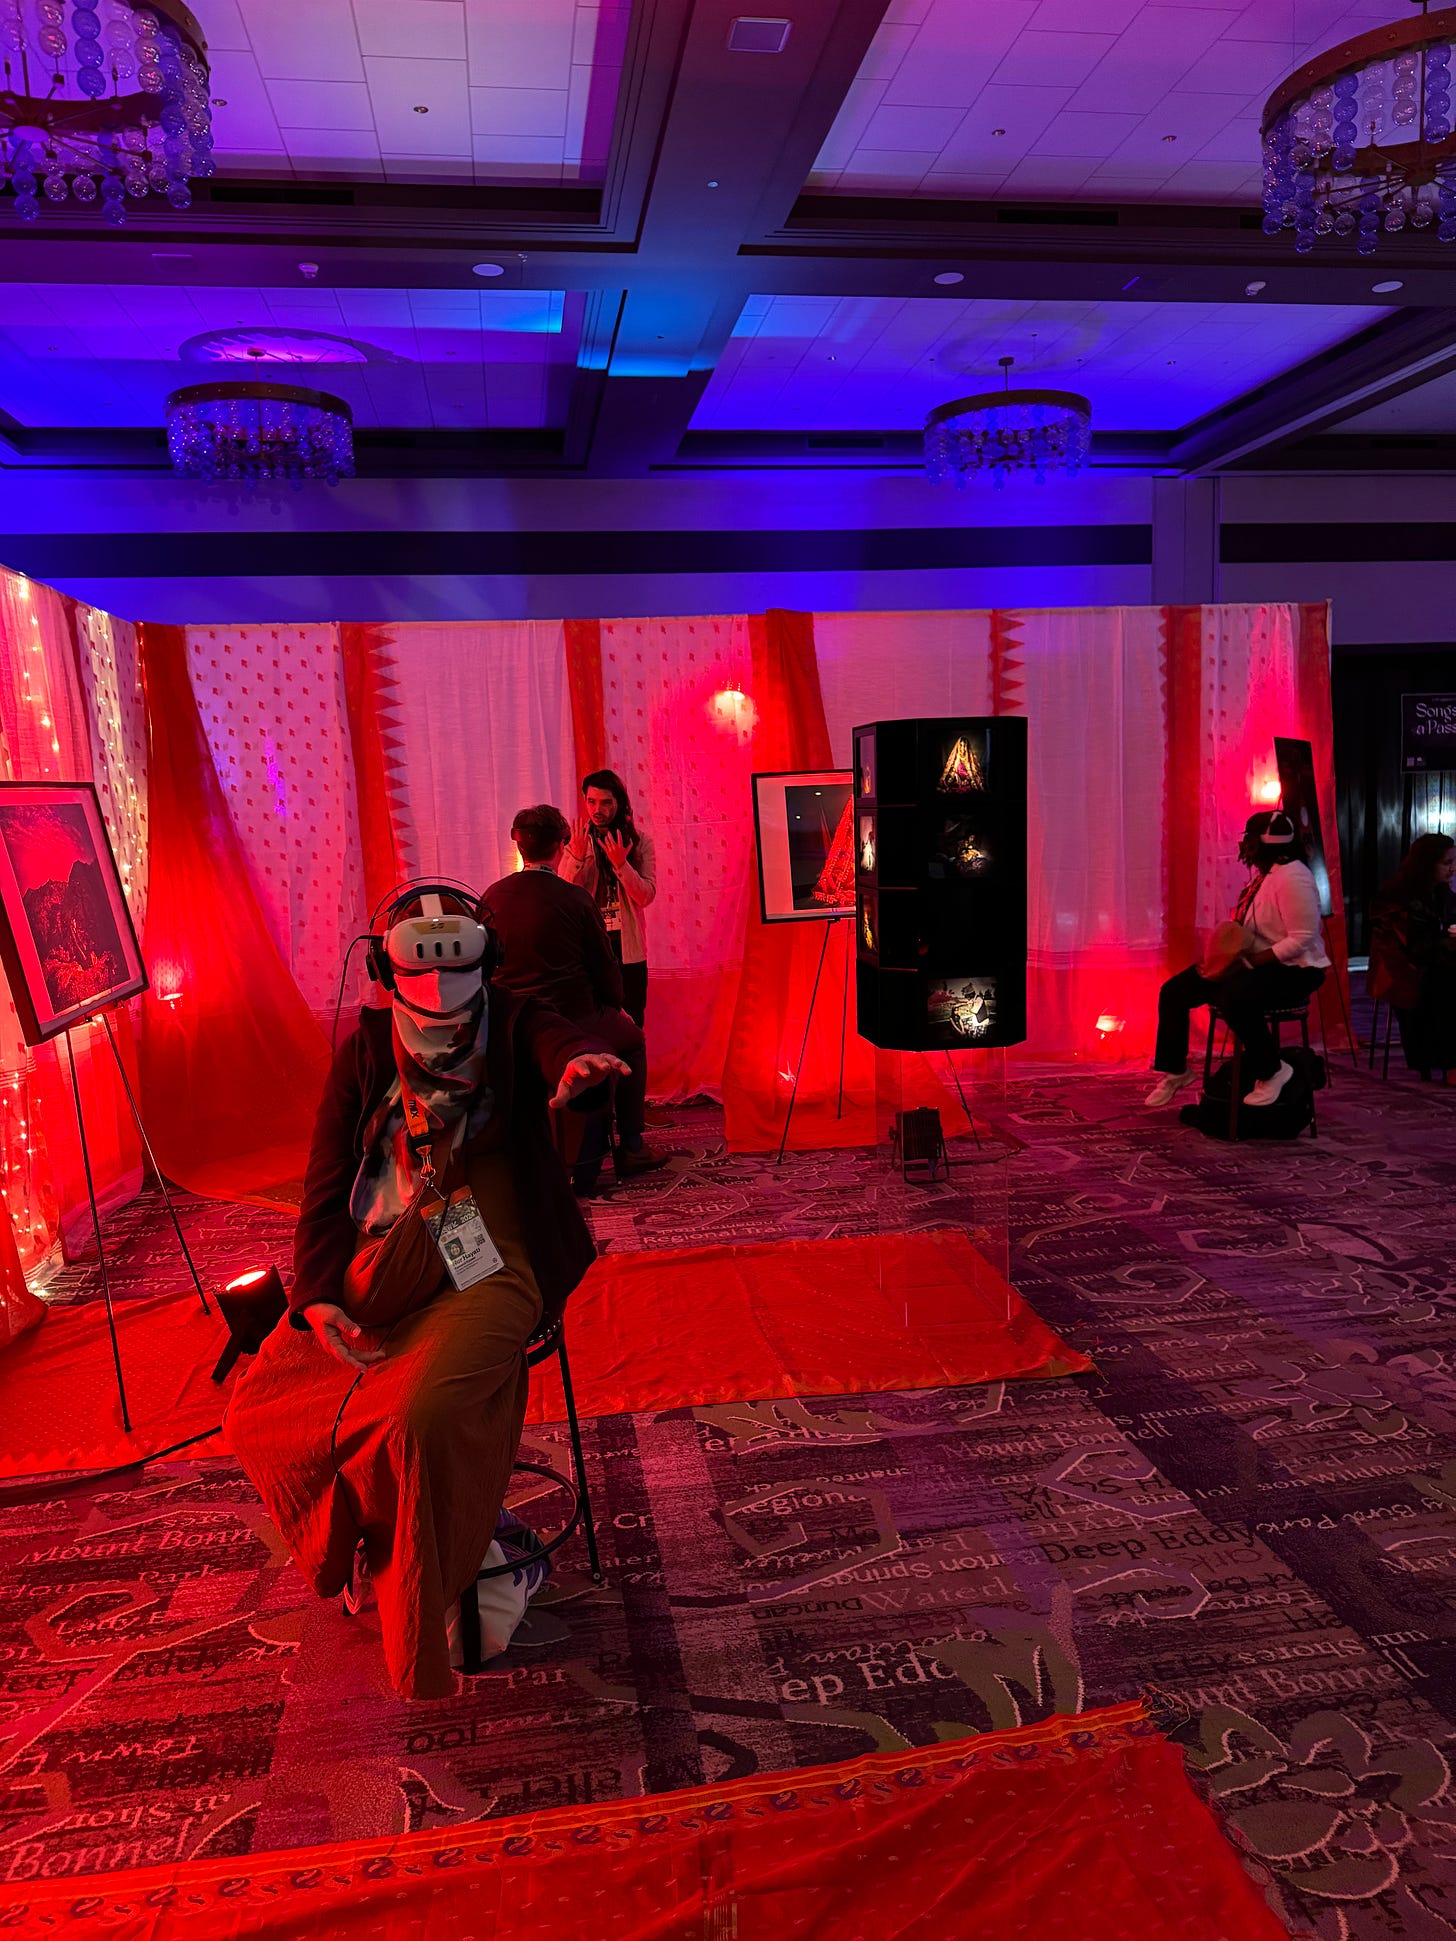 A few people sit on stools in a dimly lit exhibition hall for the XR exhibition. All wear XR headsets on their faces, and an eerie red/blue glow is in the background.